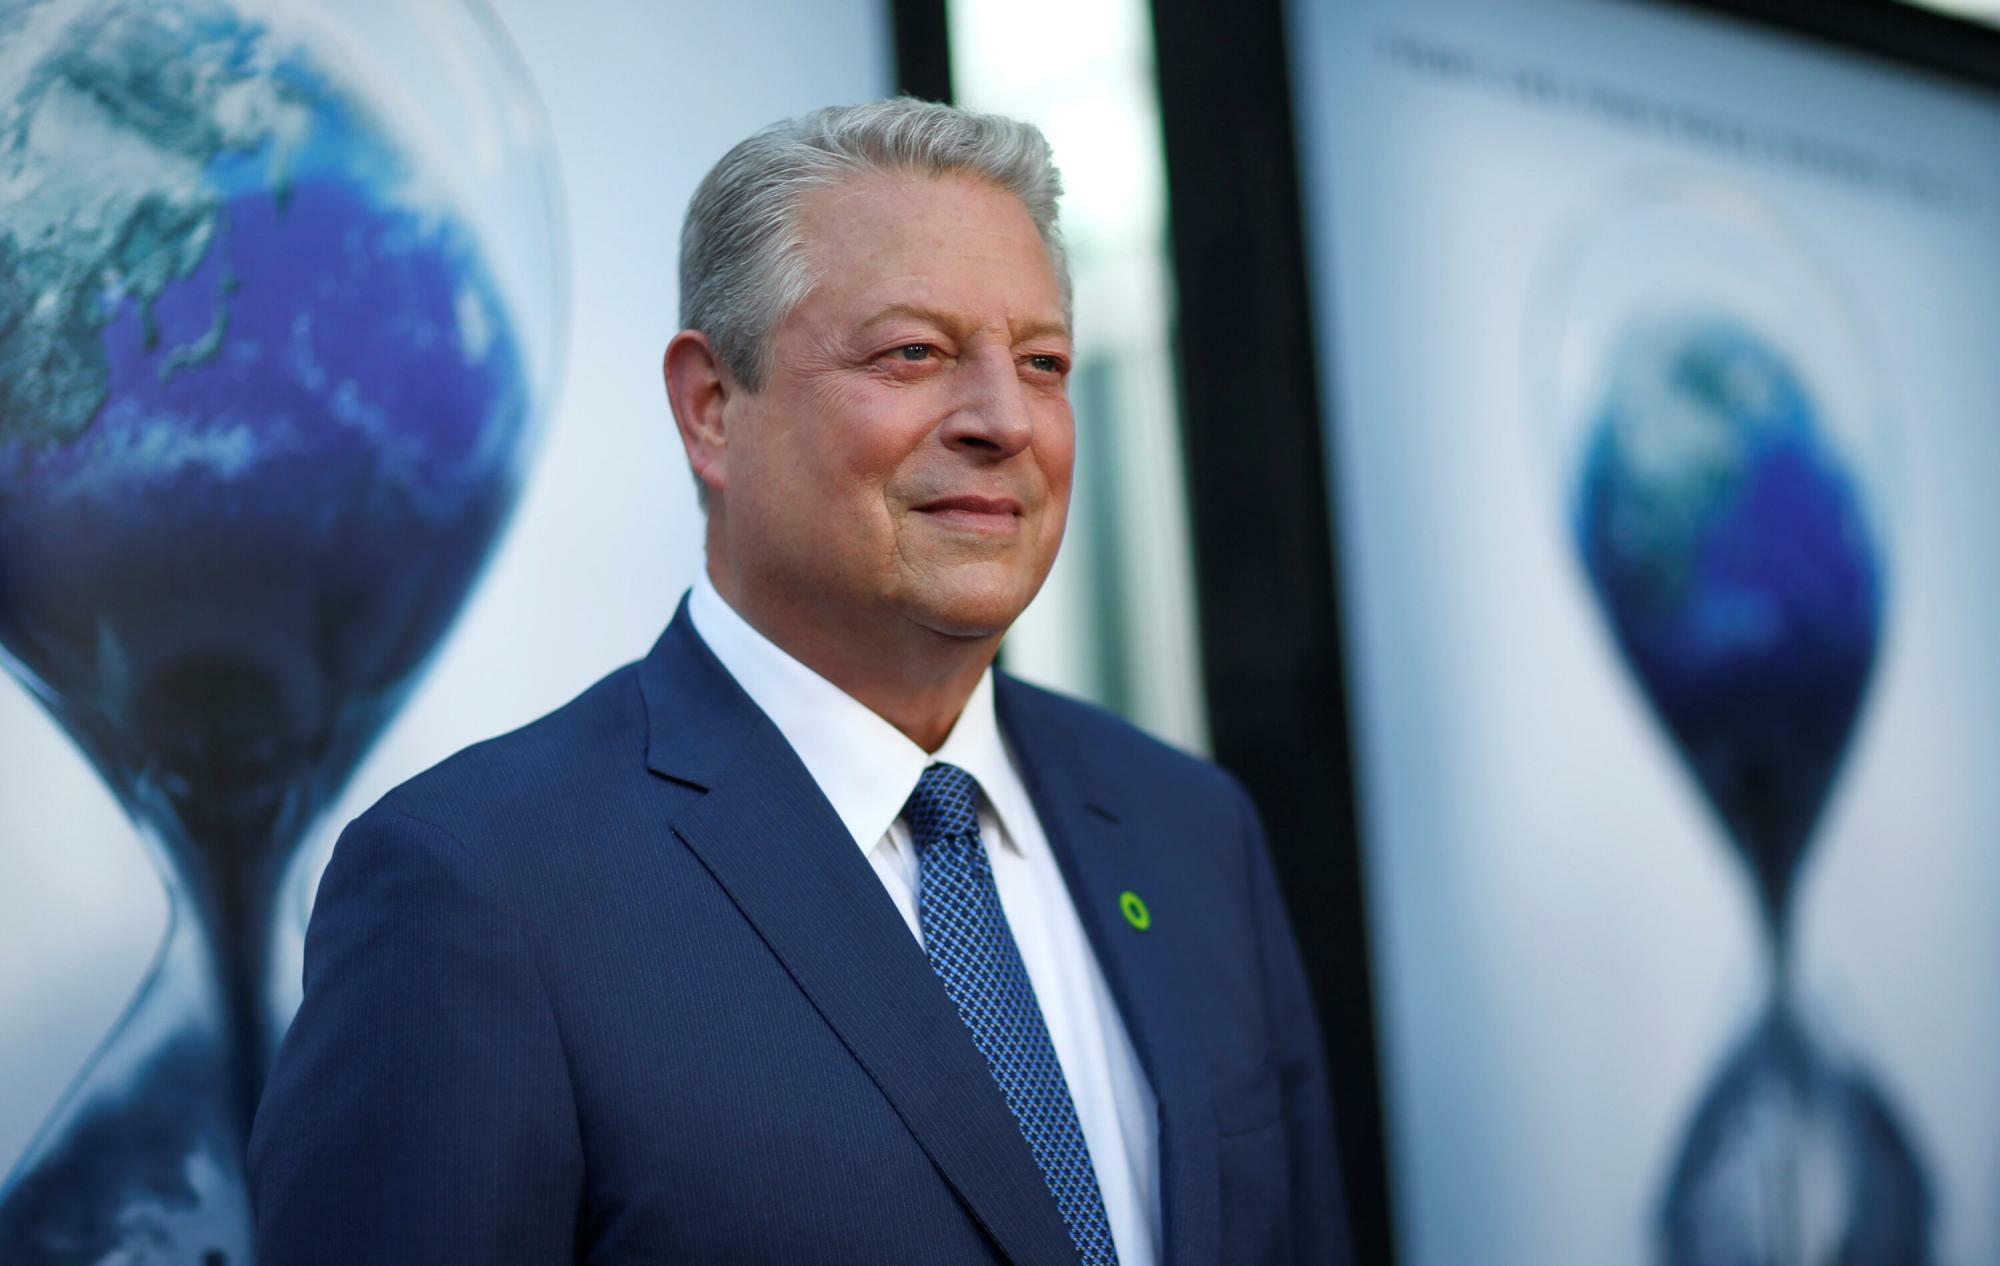 Former U.S. Vice President Al Gore attends a screening for An Inconvenient Sequel: Truth to Power 